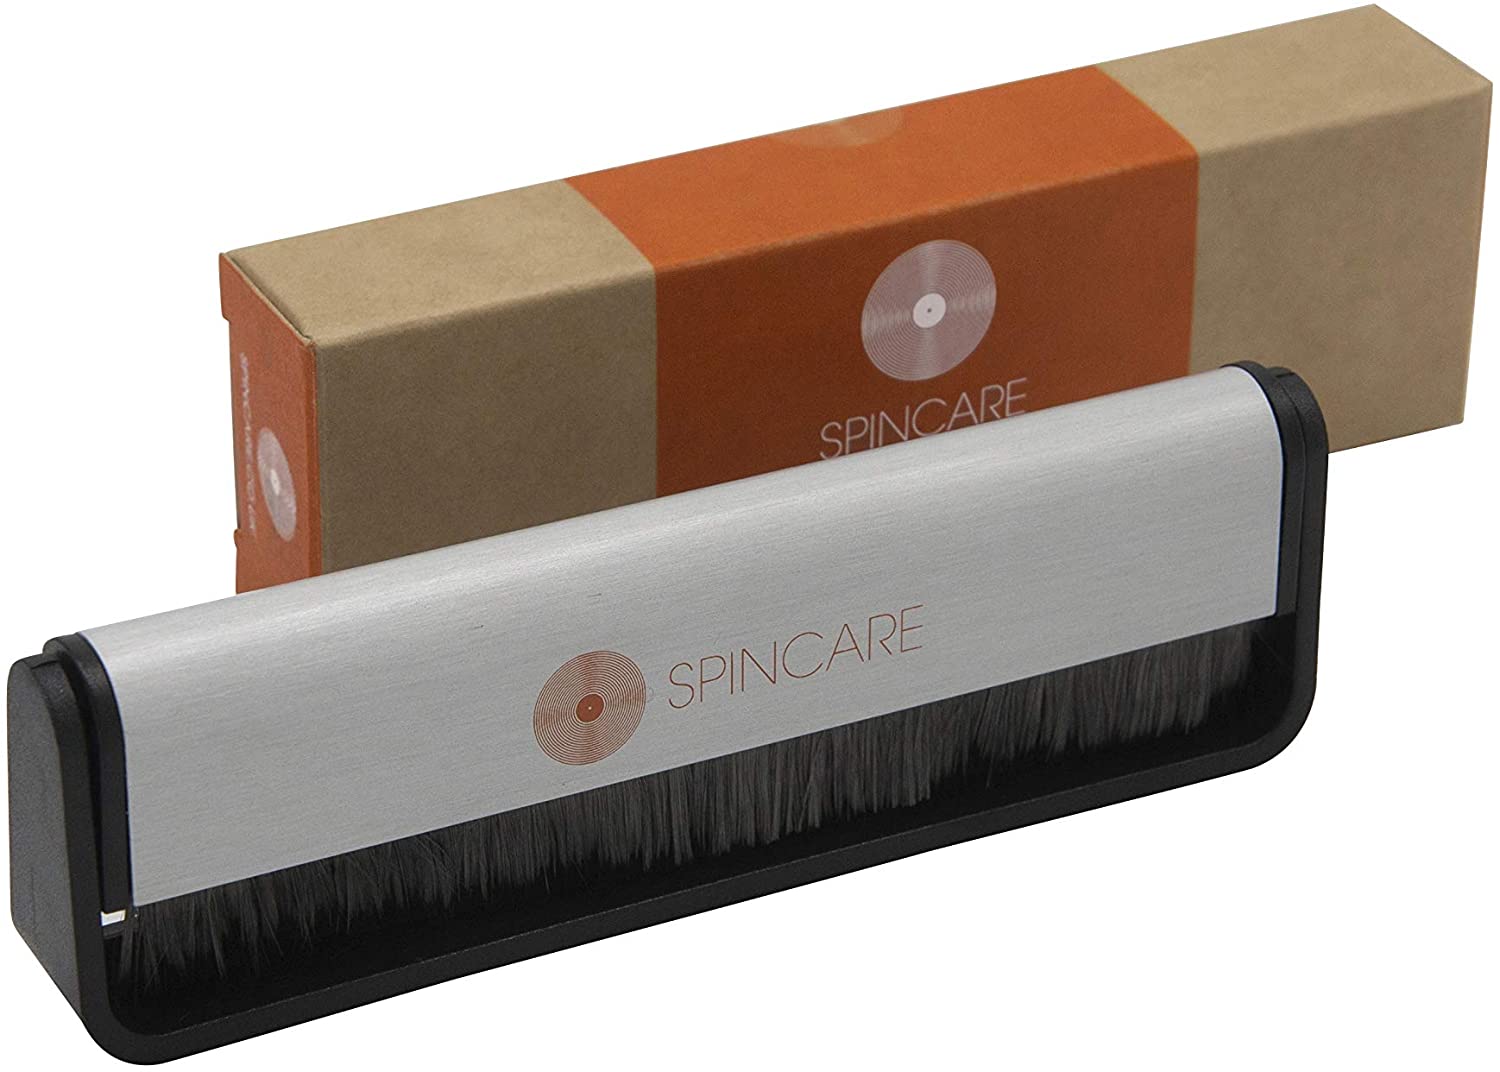 Spincare Carbon Fibre Record Cleaning Brush